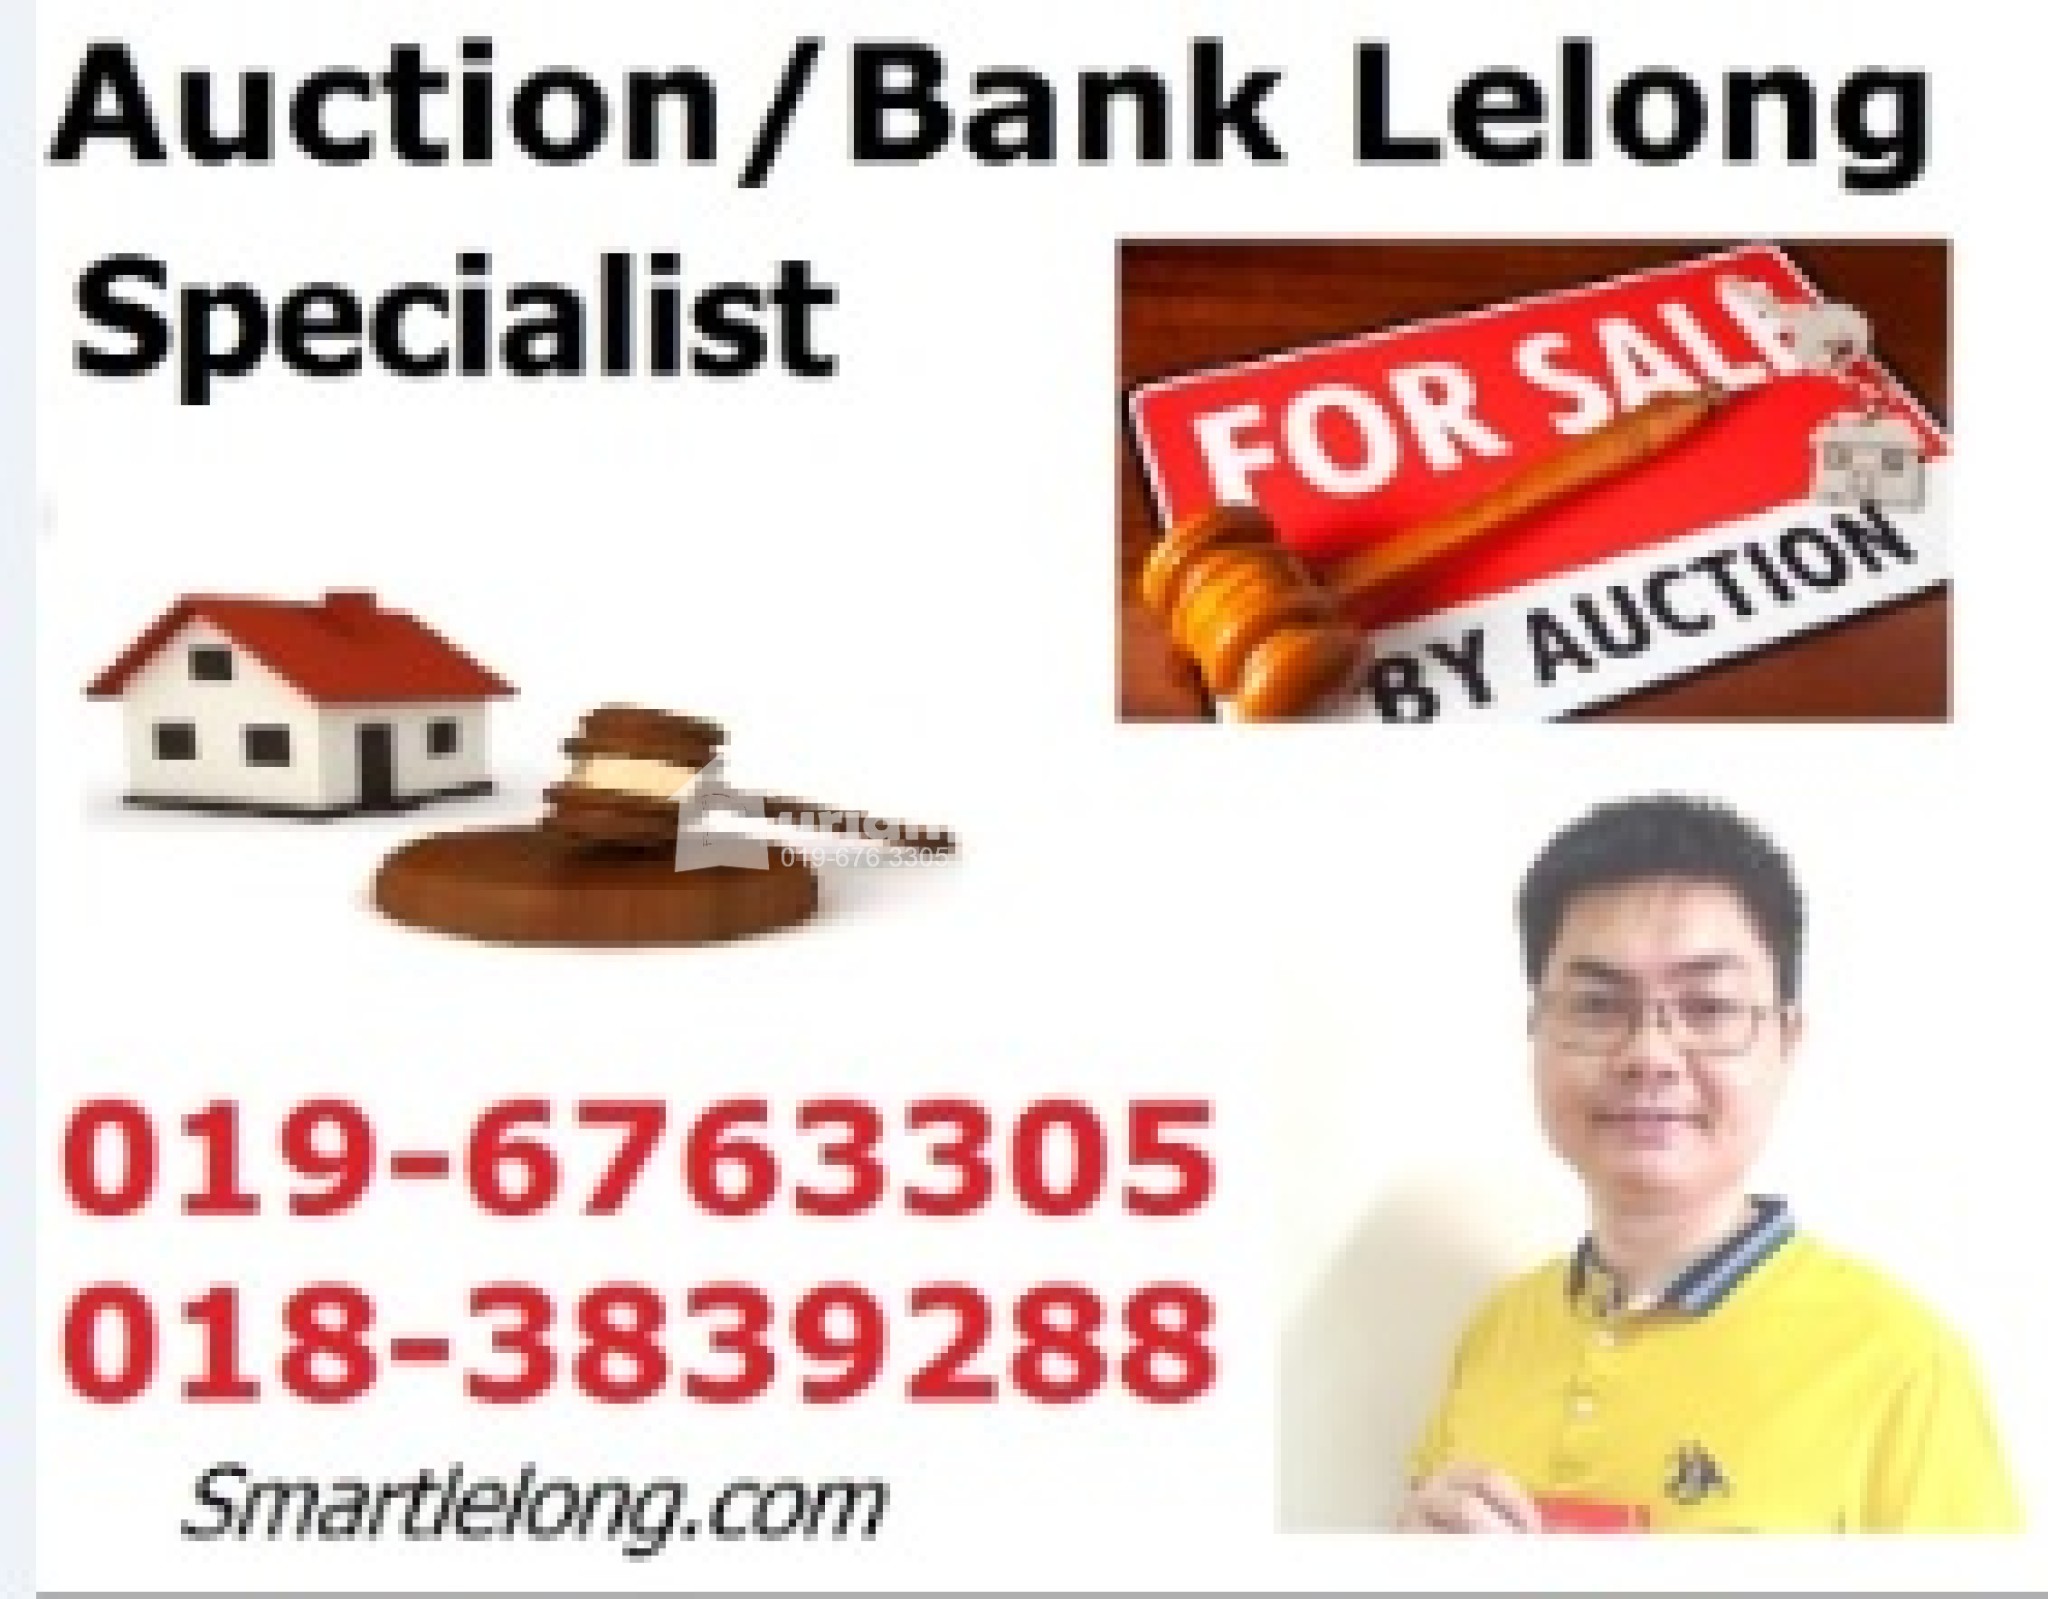 Bungalow House for Auction